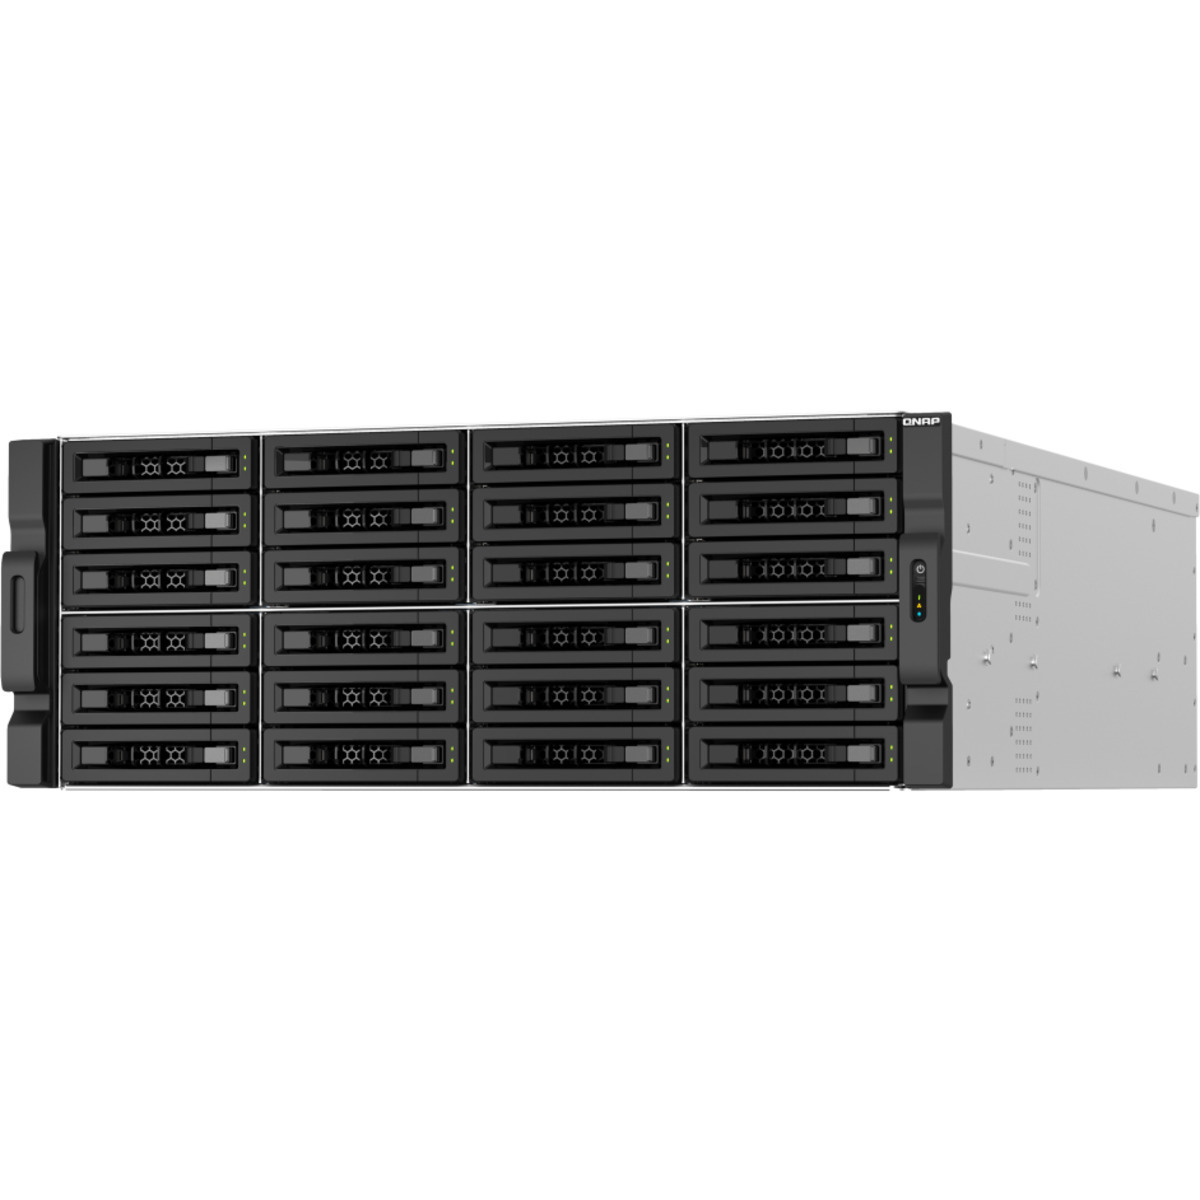 buy QNAP TS-h3087XU-RP E-2378 QuTS hero Edition 528tb RackMount NAS - Network Attached Storage Device 24x22000gb Western Digital Red Pro WD221KFGX 3.5 7200rpm SATA 6Gb/s HDD NAS Class Drives Installed - Burn-In Tested - nas headquarters buy network attached storage server device das new raid-5 free shipping usa spring sale TS-h3087XU-RP E-2378 QuTS hero Edition